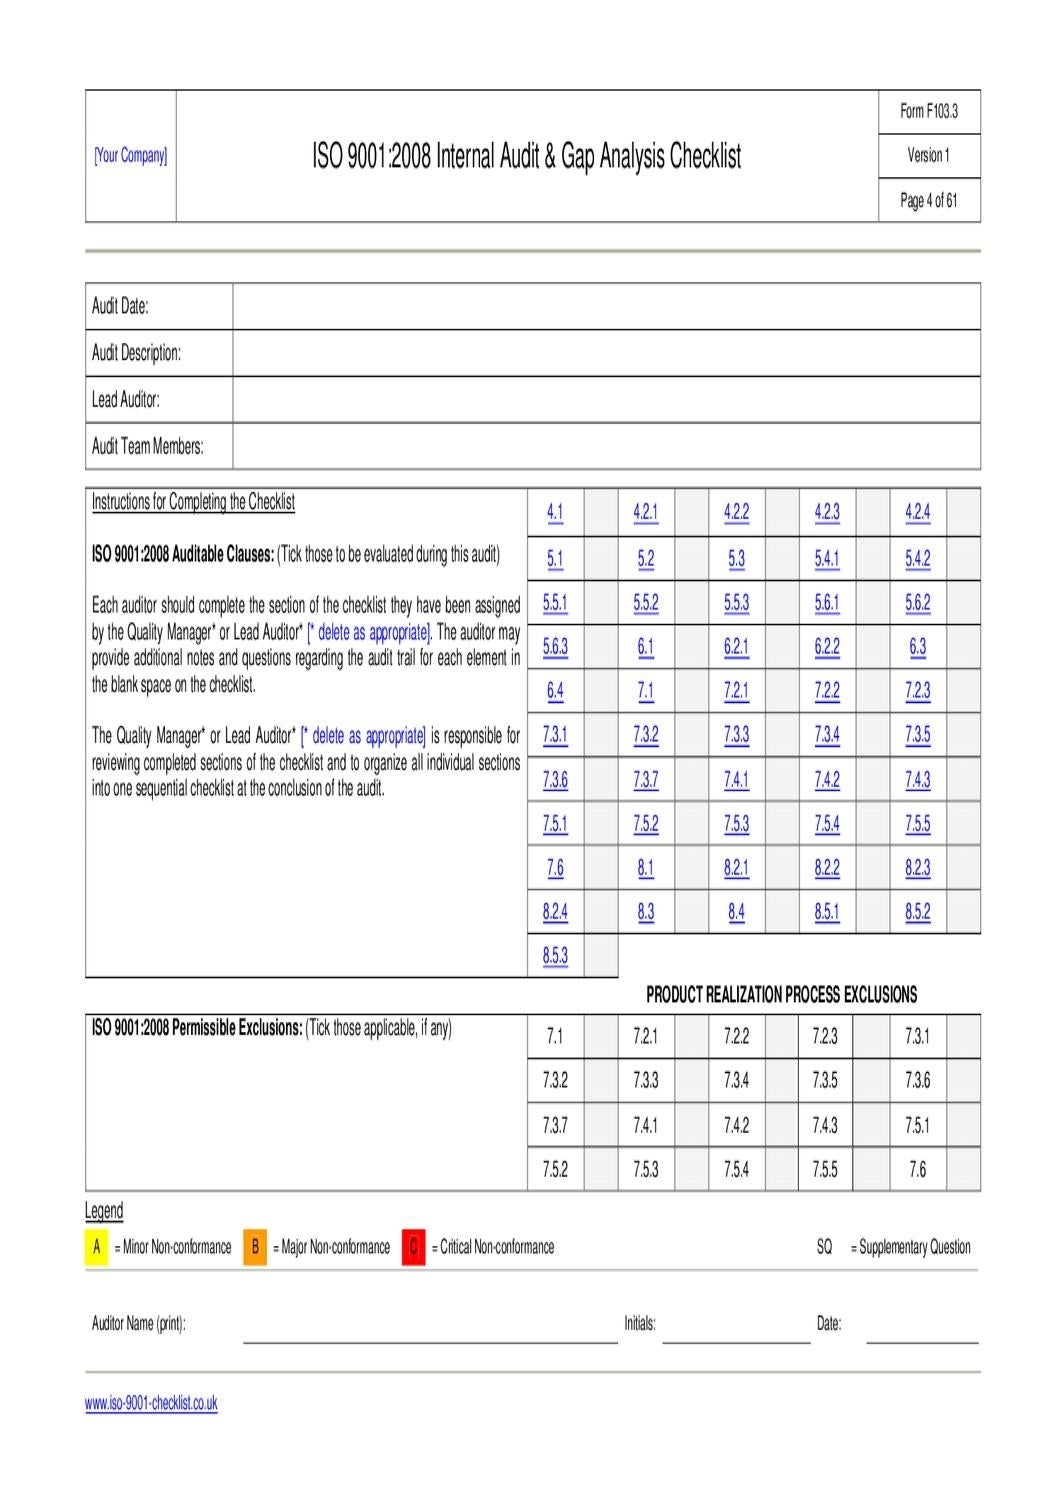 Internal Audit Checklist Example By Iso 9001 Checklist – Issuu In Internal Audit Report Template Iso 9001